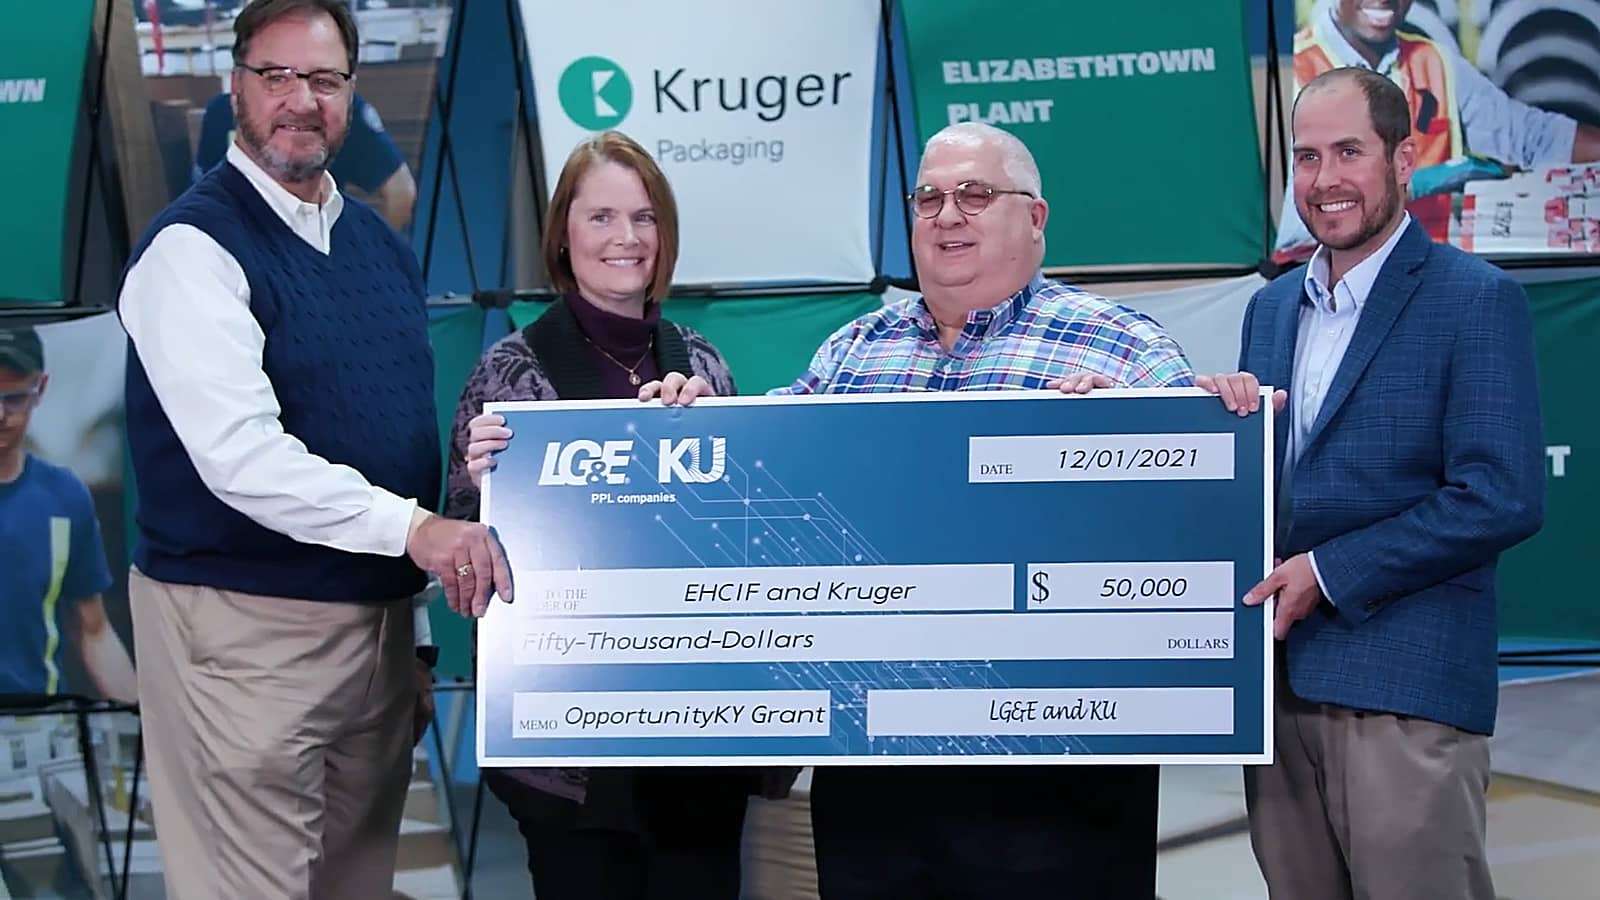 Kruger Packaging employees holding oversized check for $50,000 from LG&E and KU